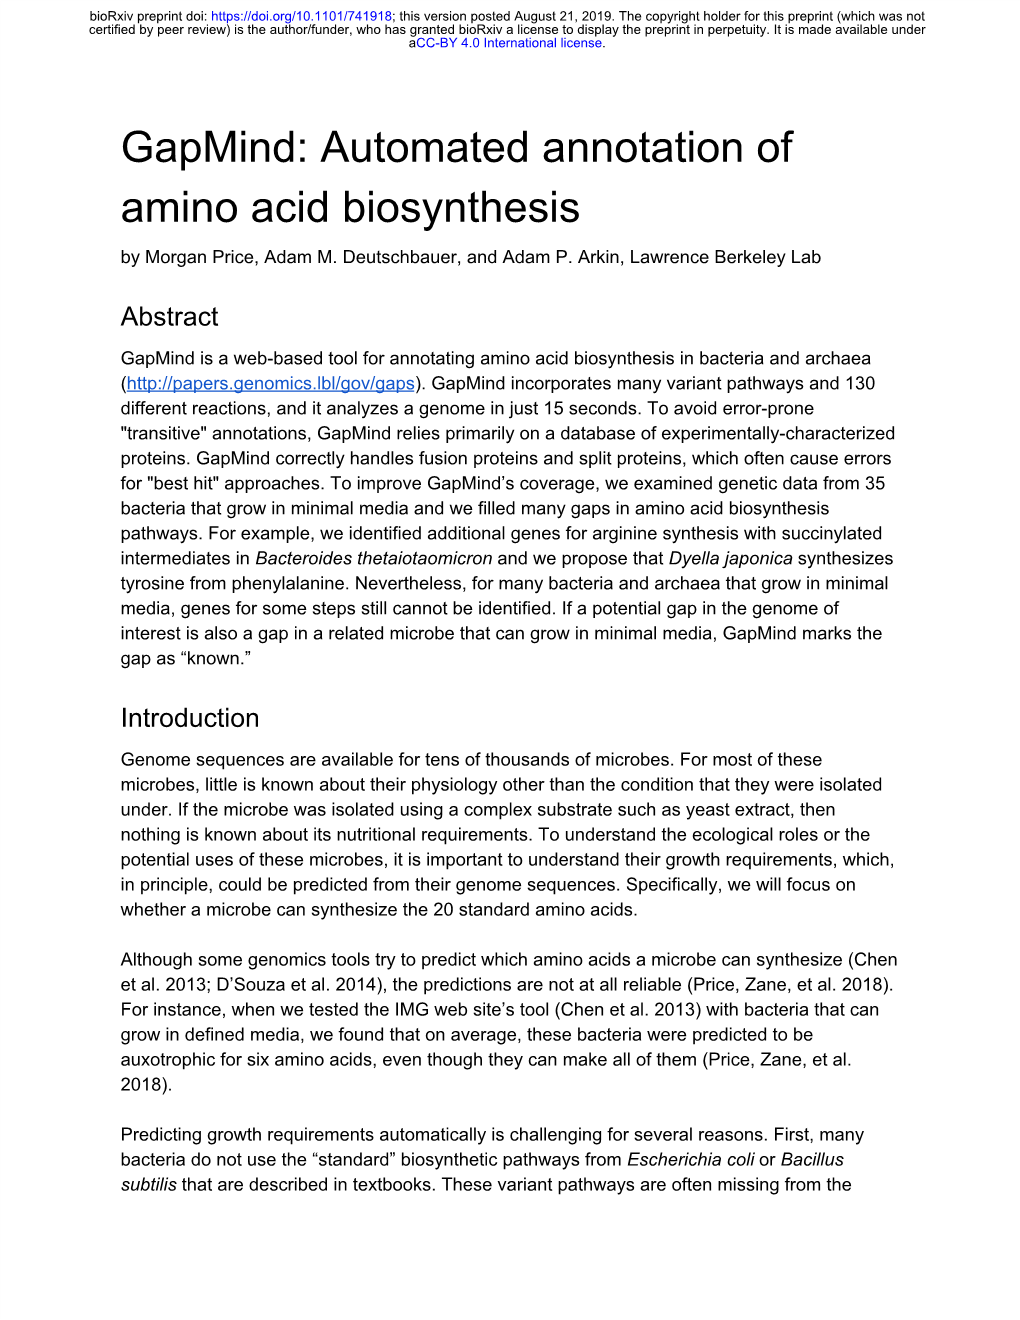 Automated Annotation of Amino Acid Biosynthesis by Morgan Price, Adam M